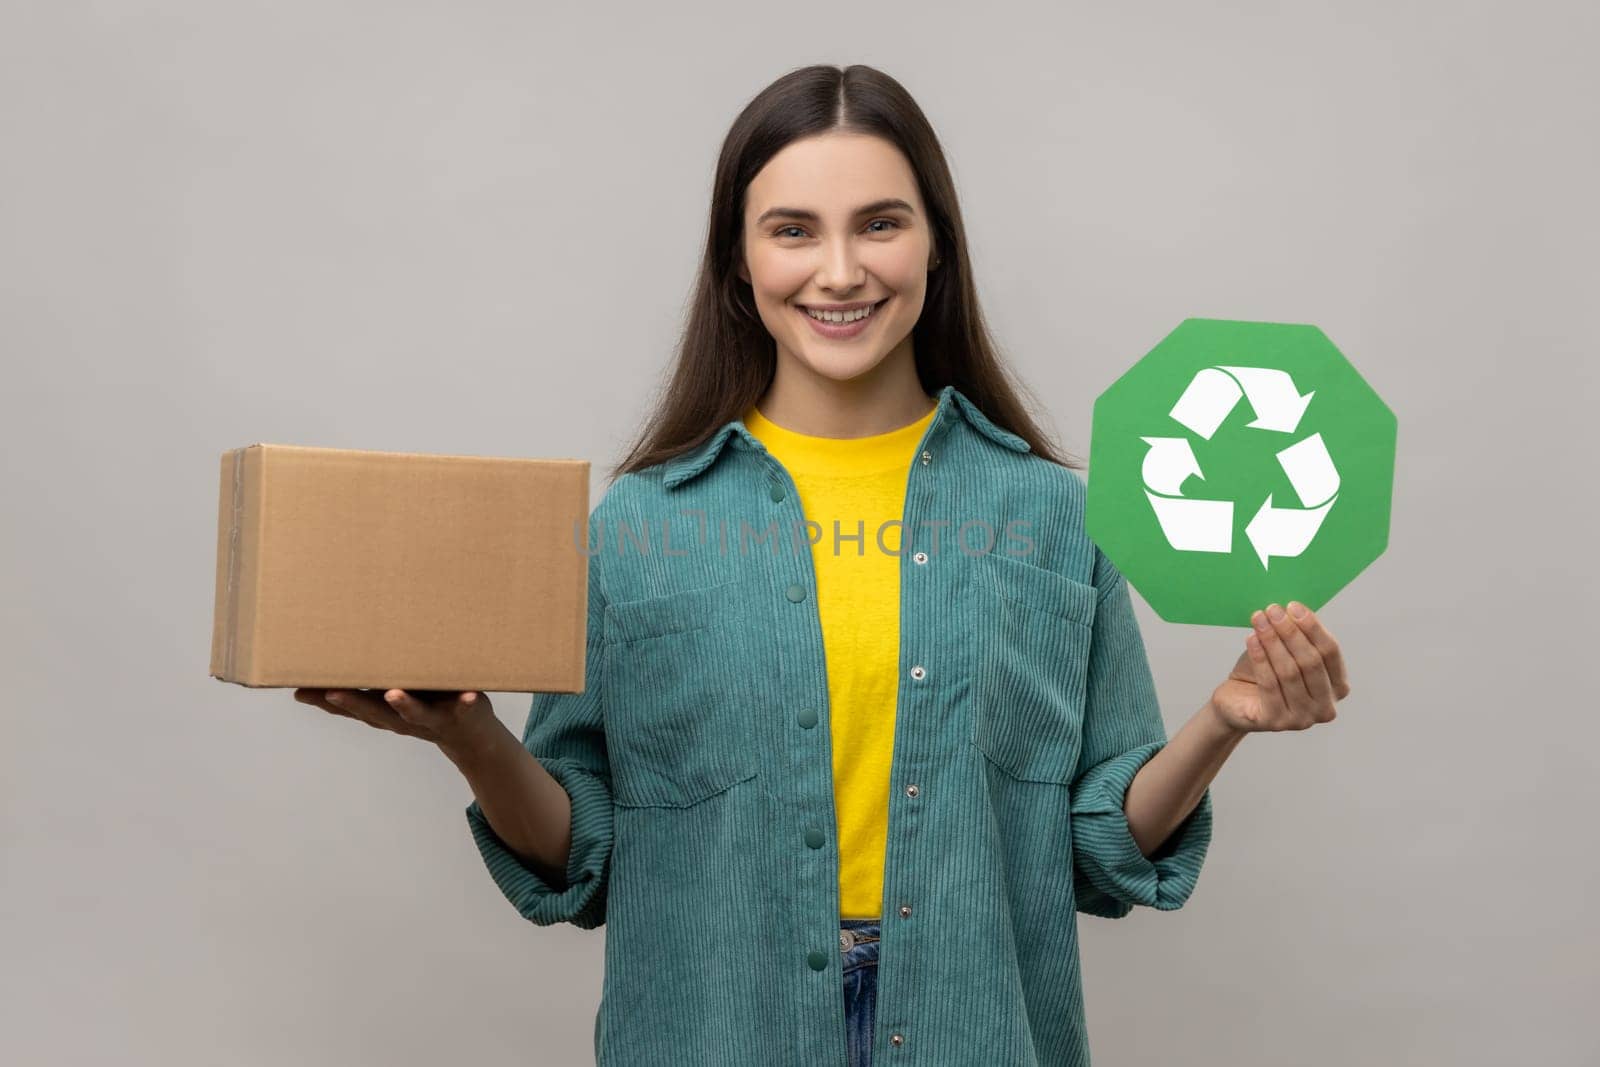 Happy positive young adult woman holding green recycling sign and cardboard package, saving environment, ecology concept, wearing casual style jacket. Indoor studio shot isolated on gray background.